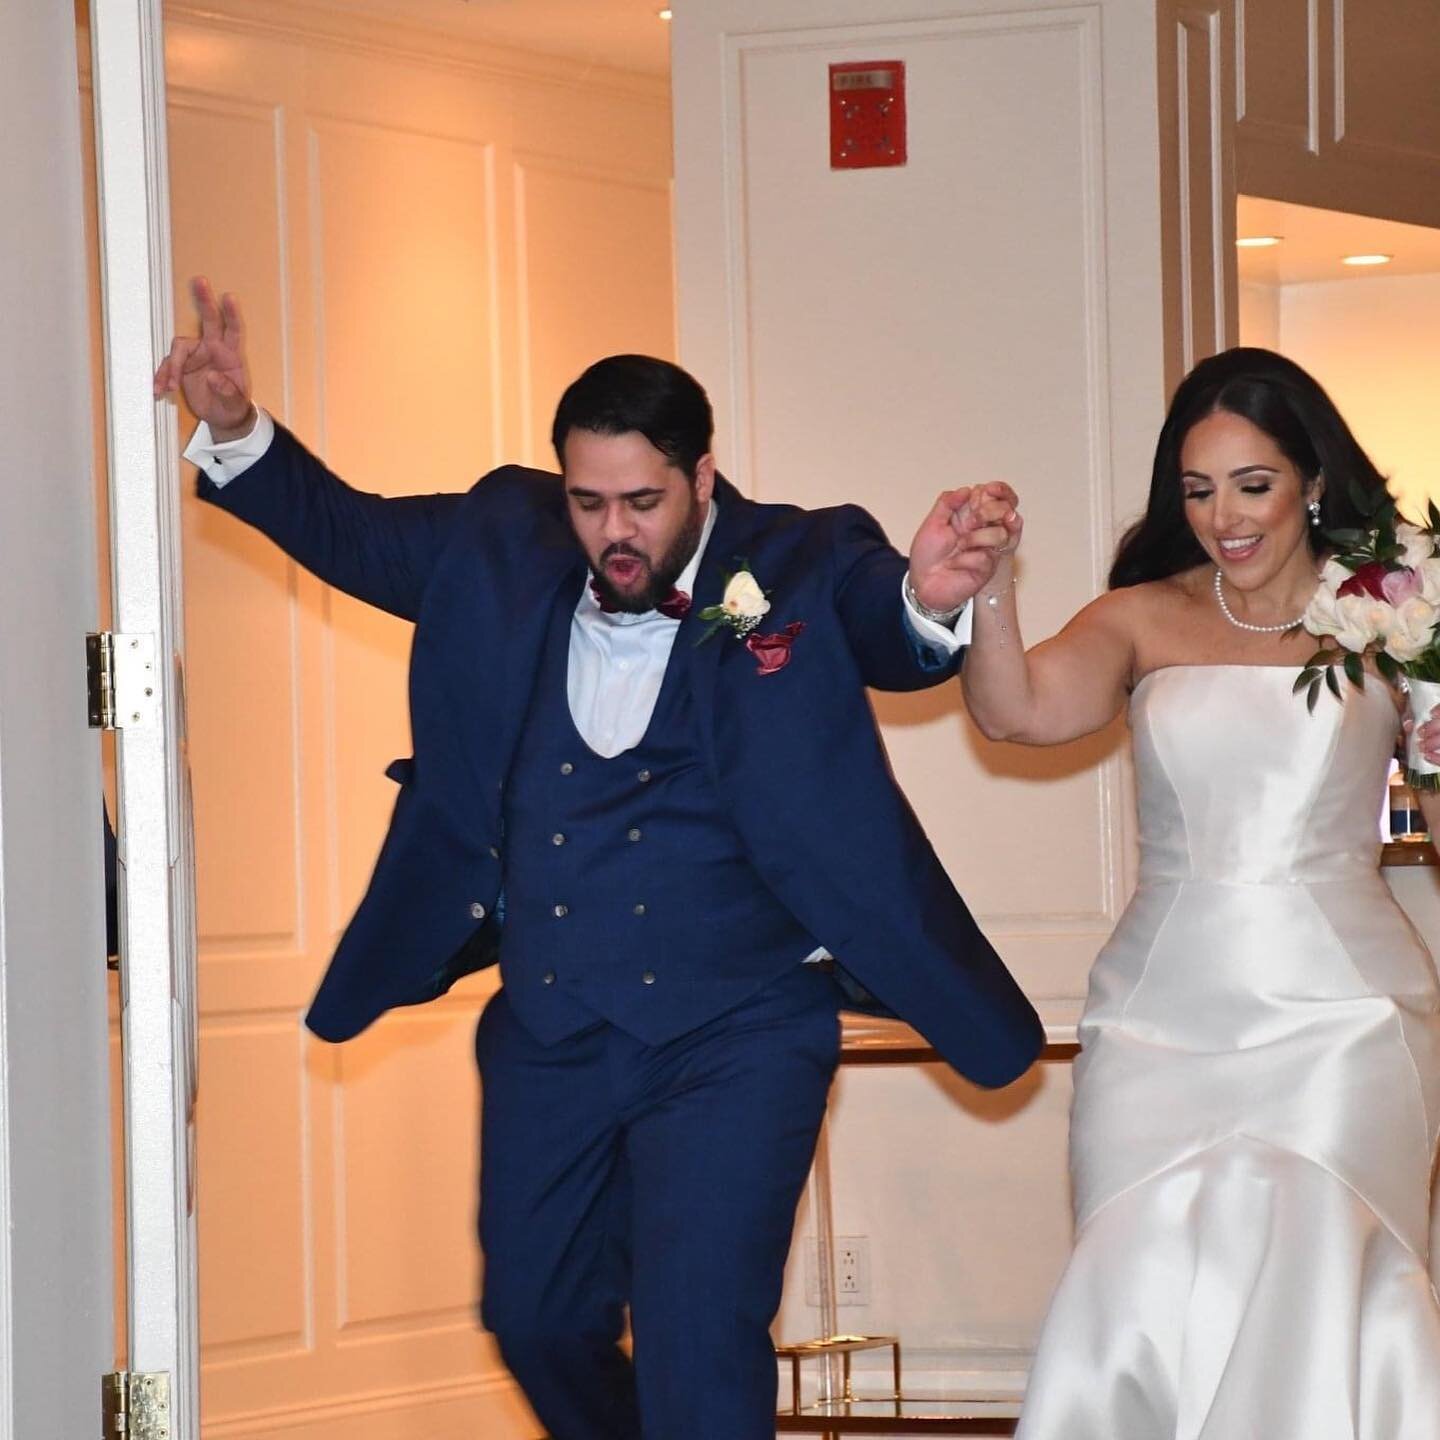 Justin &amp; Dahlia warmed up a cold day in January at the Piermont with their closest family and friends, celebrating the night away on the dance floor! There was even a belly dancer as a dinner time highlight! Wishing you both a lifetime of love an